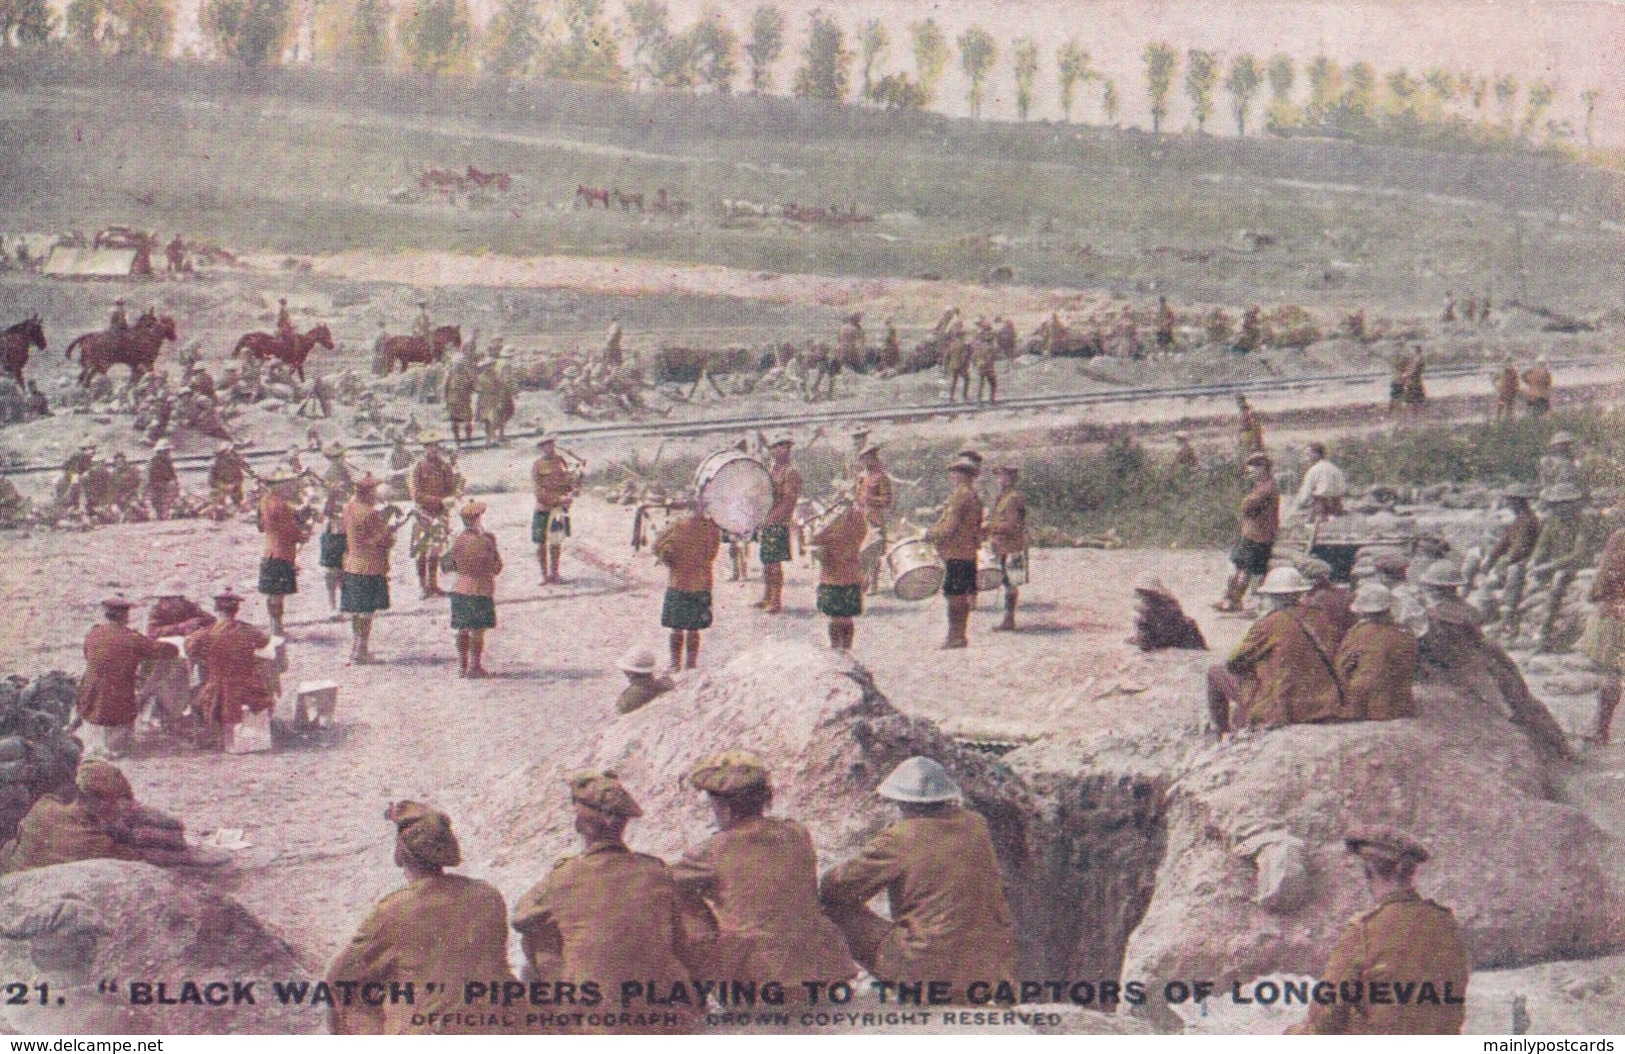 AQ54 Military - Daily Mail Battle Pictures 21 - Blackwatch Pipers Playing To The Captors Of Longueval - War 1914-18